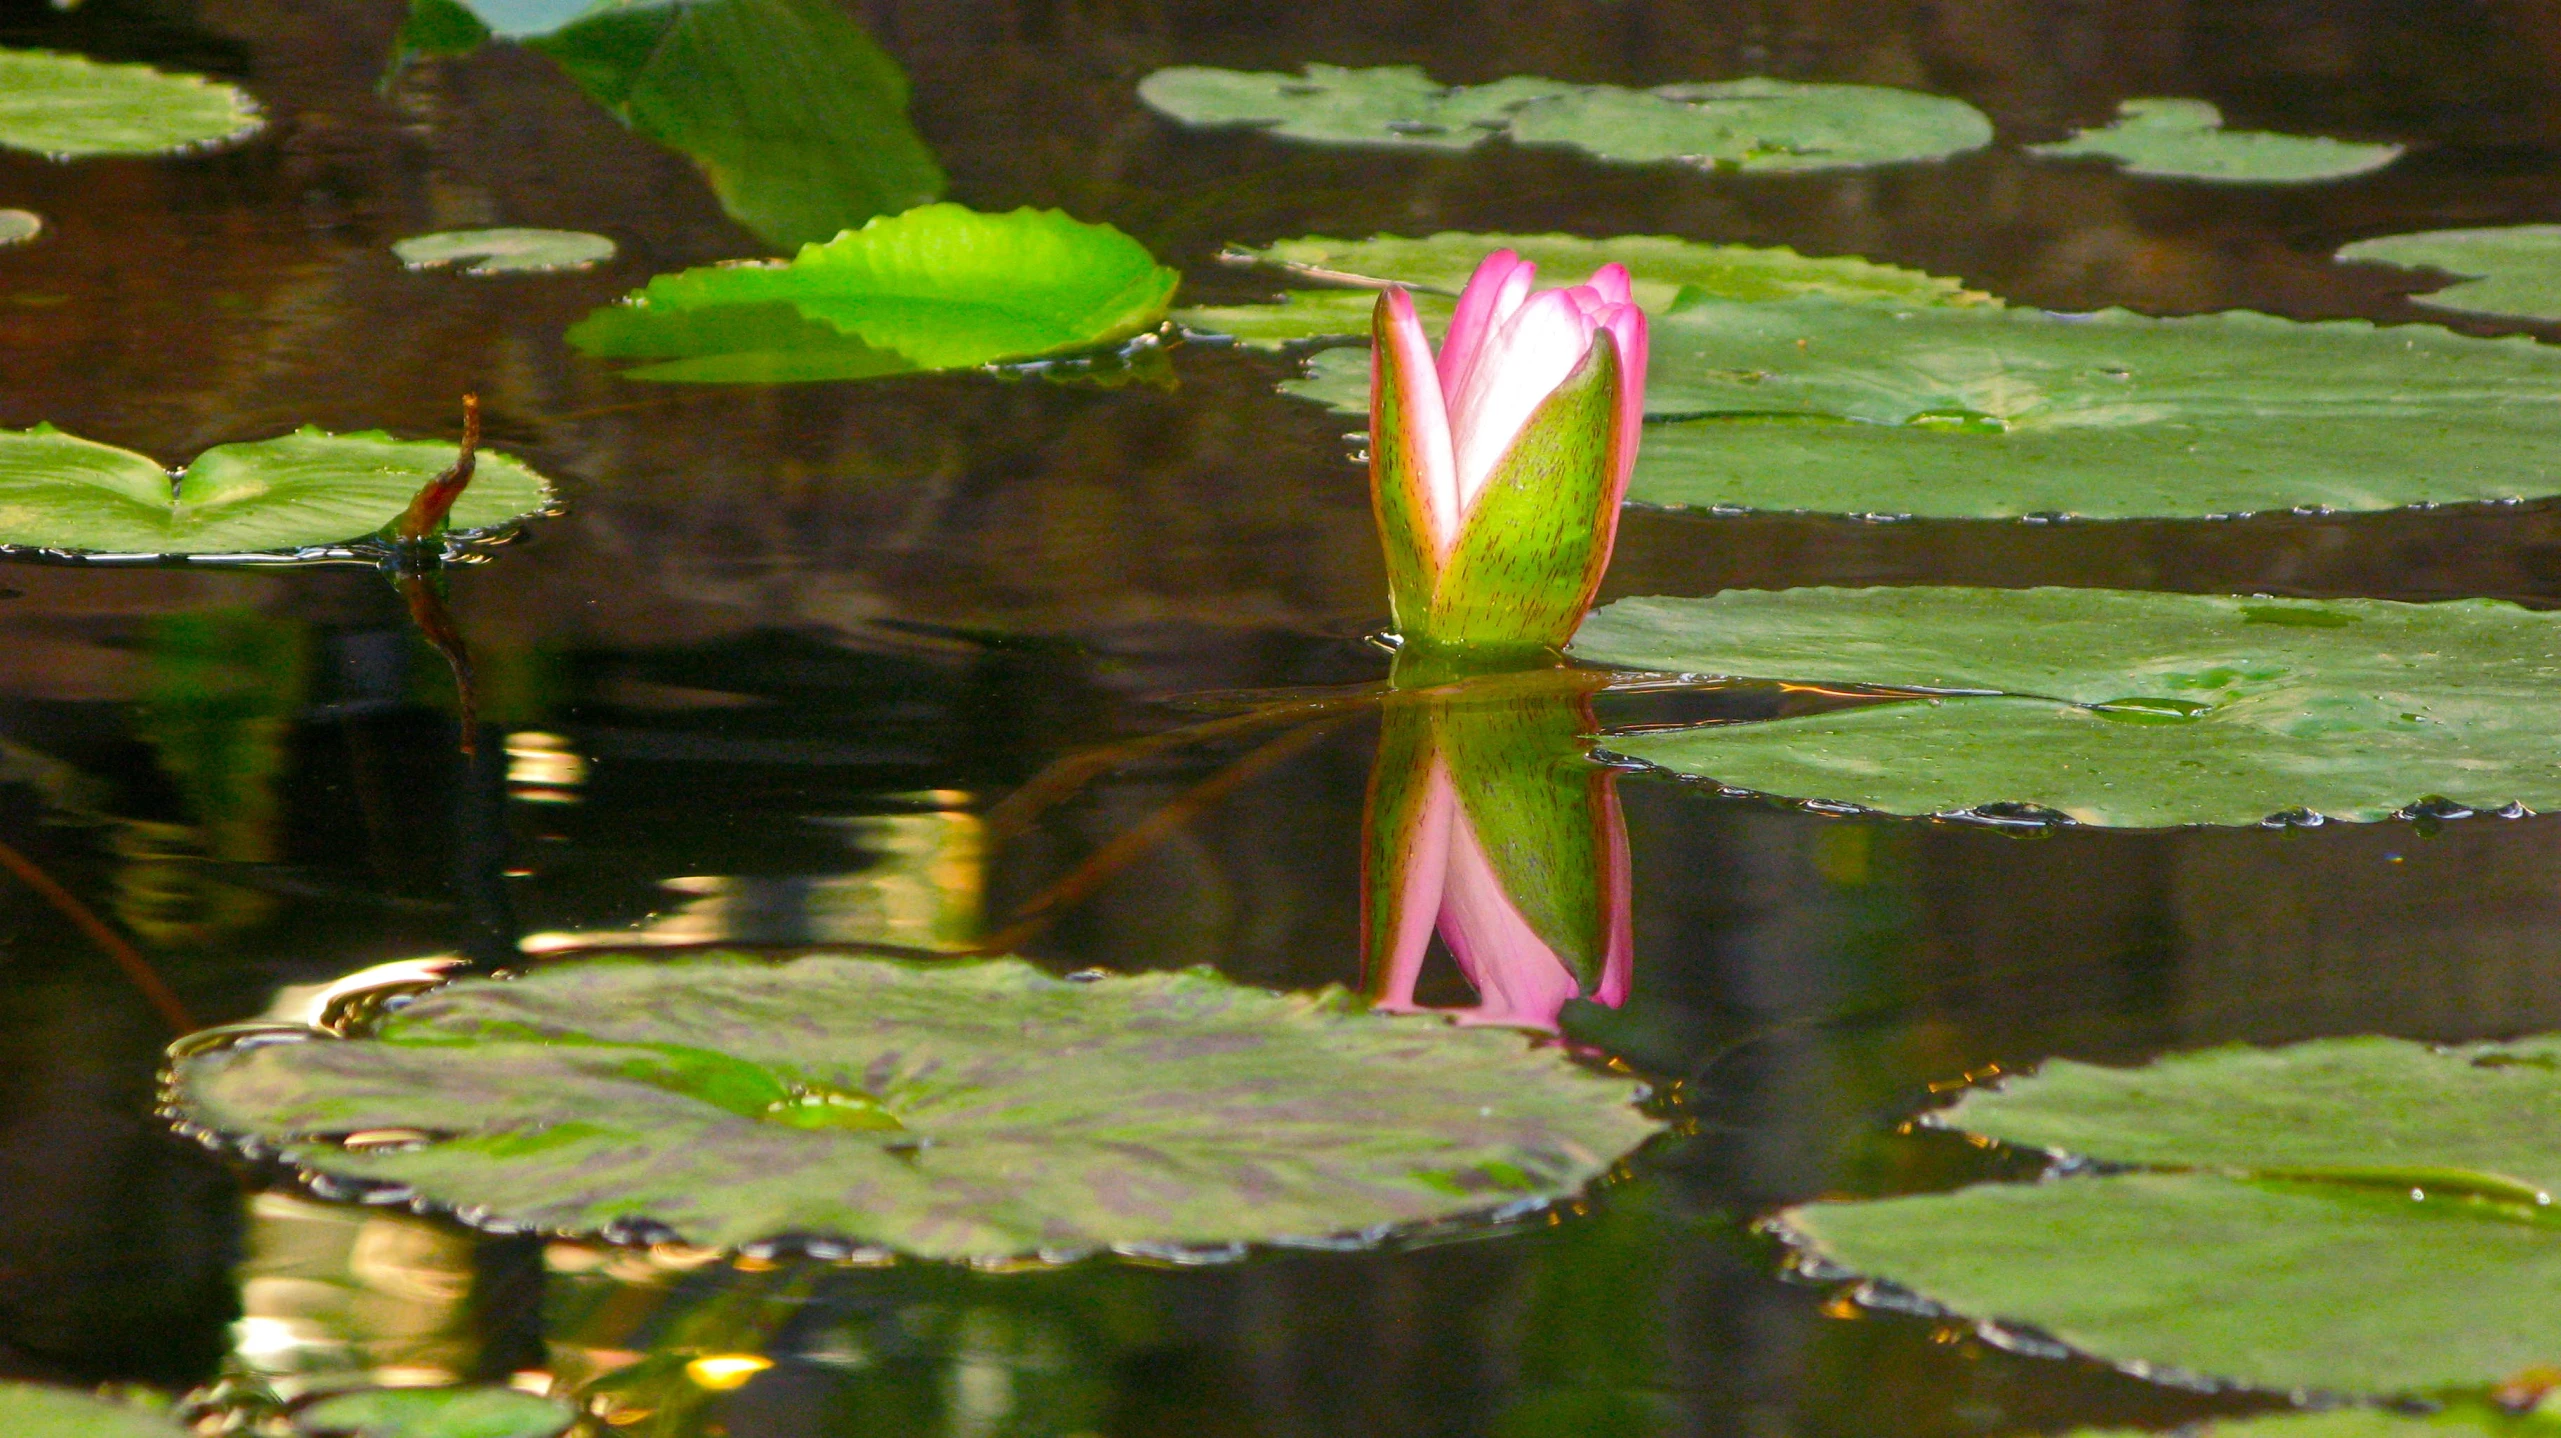 a small pond has lily pads on the water